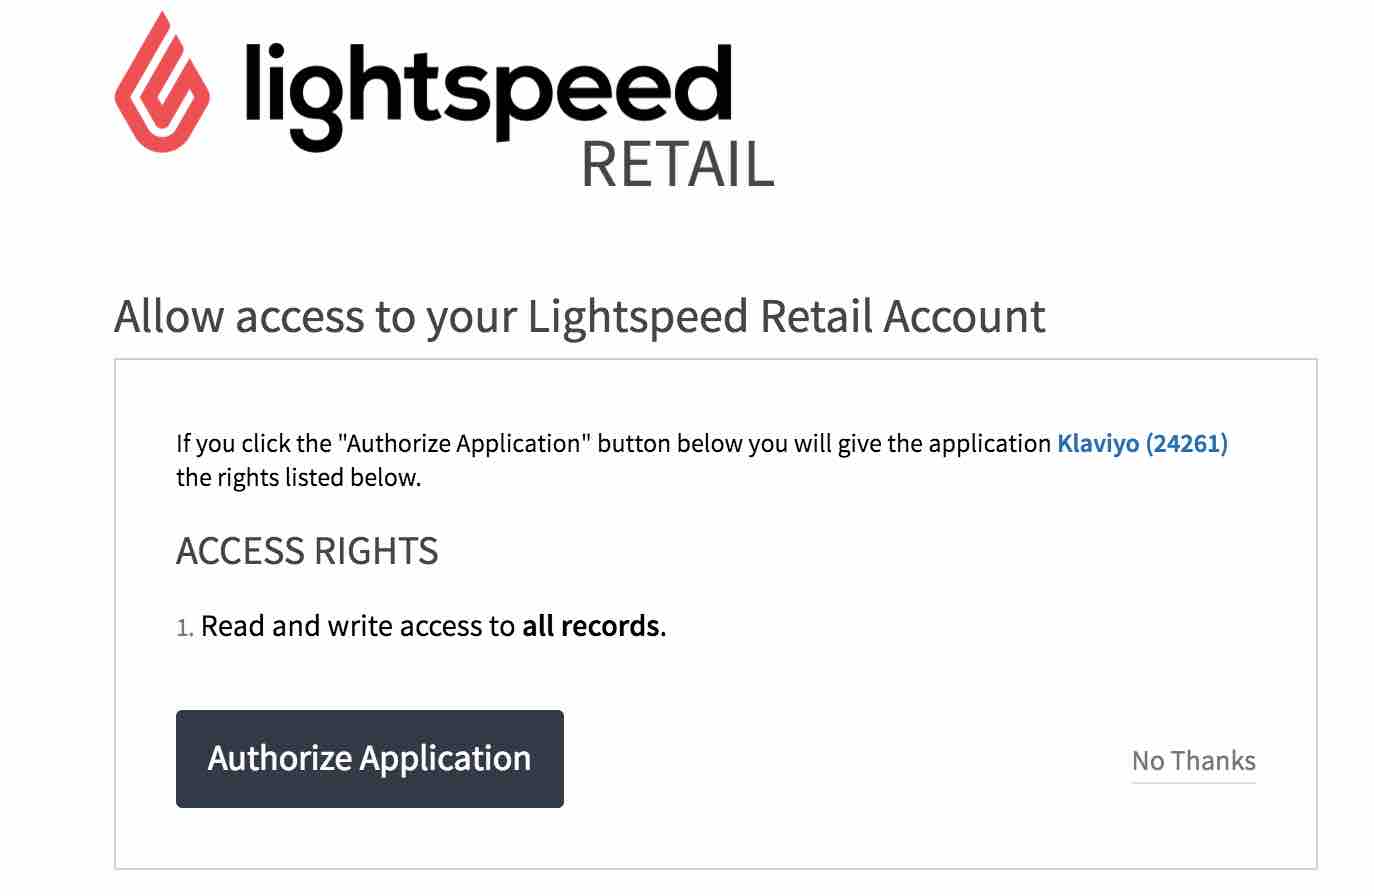 Page showing allow access to your Lightspeed retail account with access rights listed and Authorize Application with black background